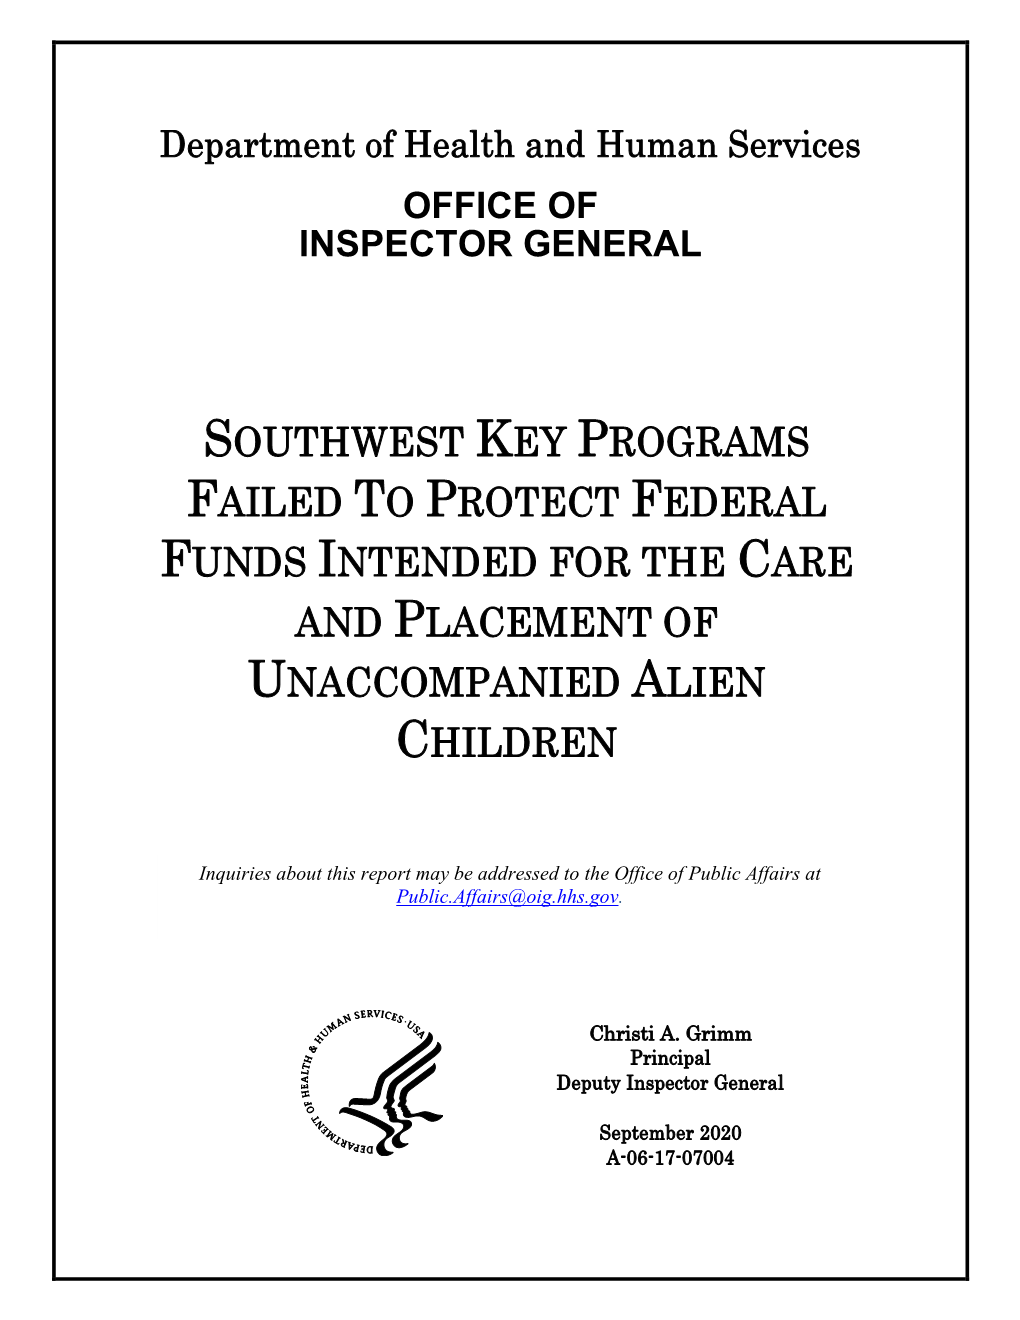 Southwest Key Programs Failed to Protect Federal Funds Intended for the Care and Placement of Unaccompanied Alien Children